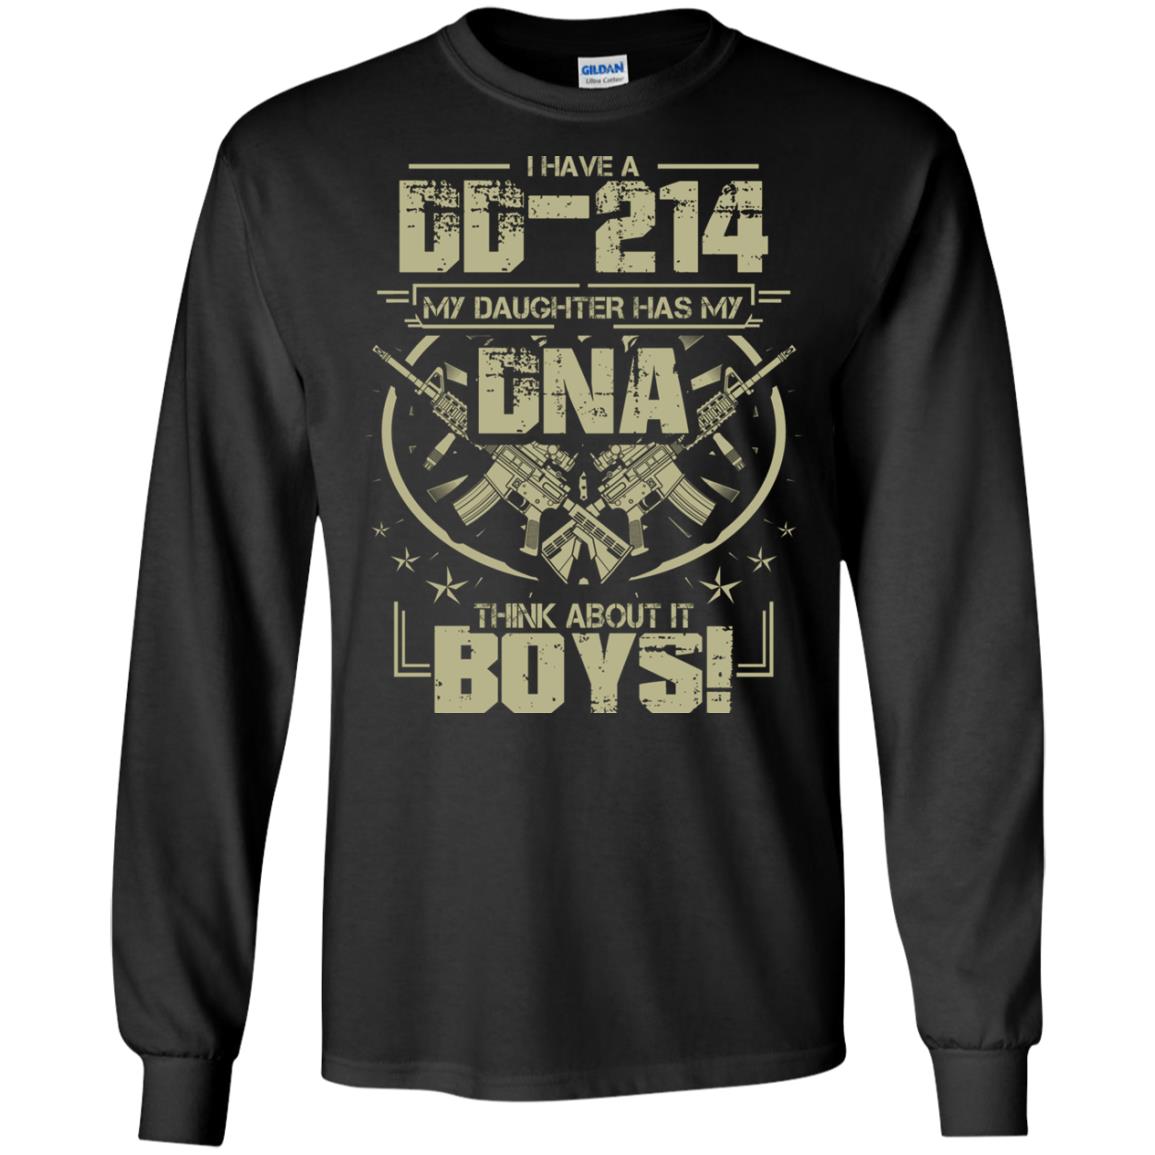 I Have A Dd-214 My Daughter Has My Dna Think About It Boys Daddy ShirtG240 Gildan LS Ultra Cotton T-Shirt